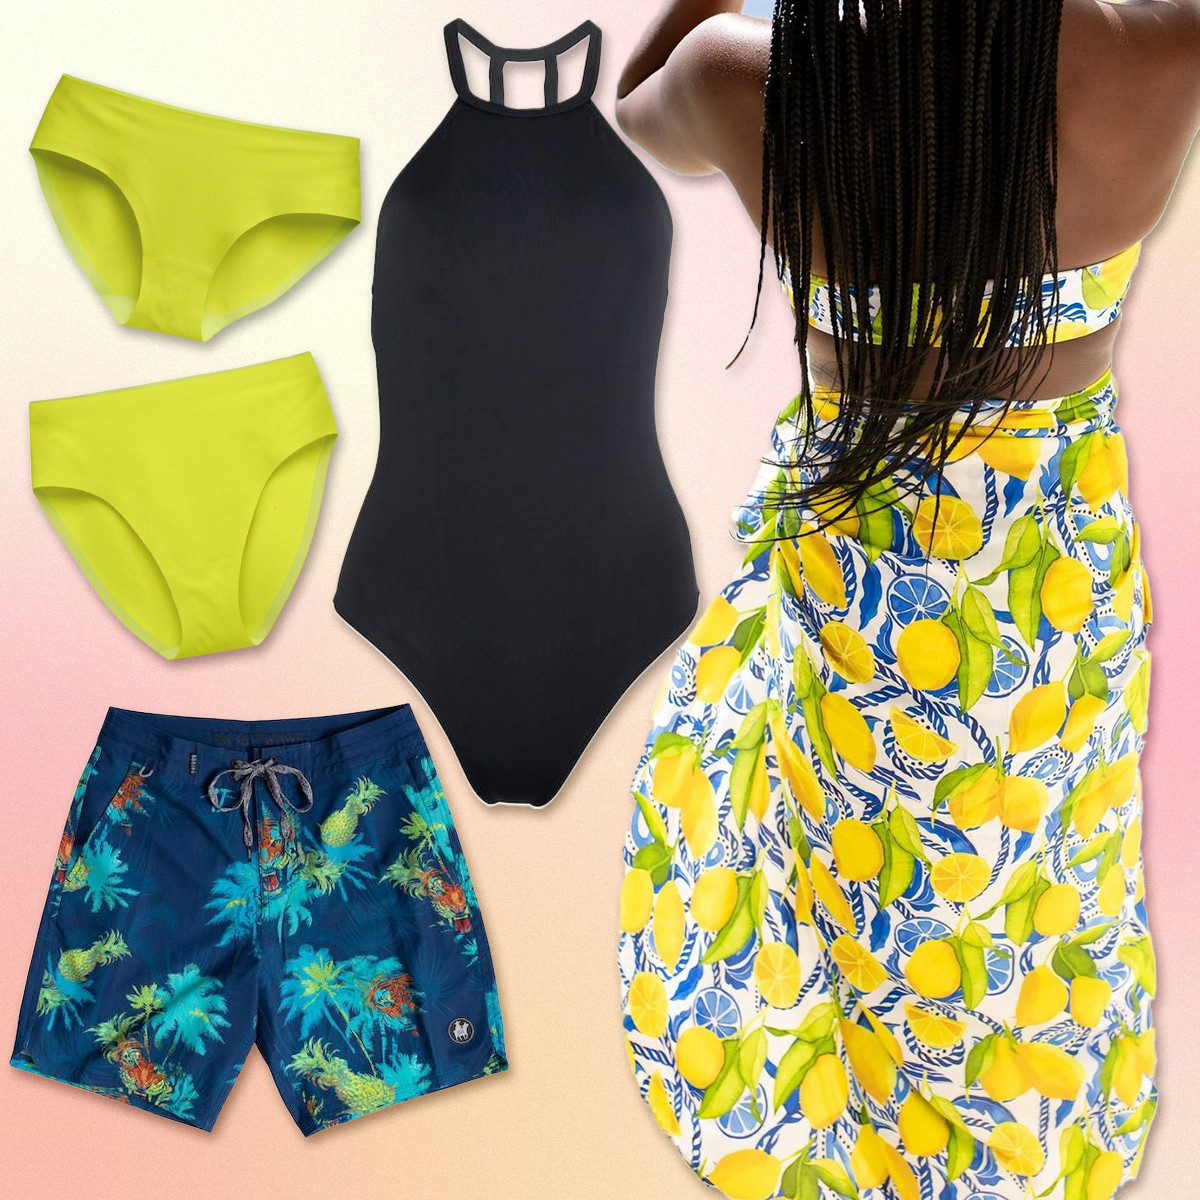 Spring Swimwear Must-Haves: Shop 20 Essential Bikinis, Bandeaus, One-Pieces & More – E! Online